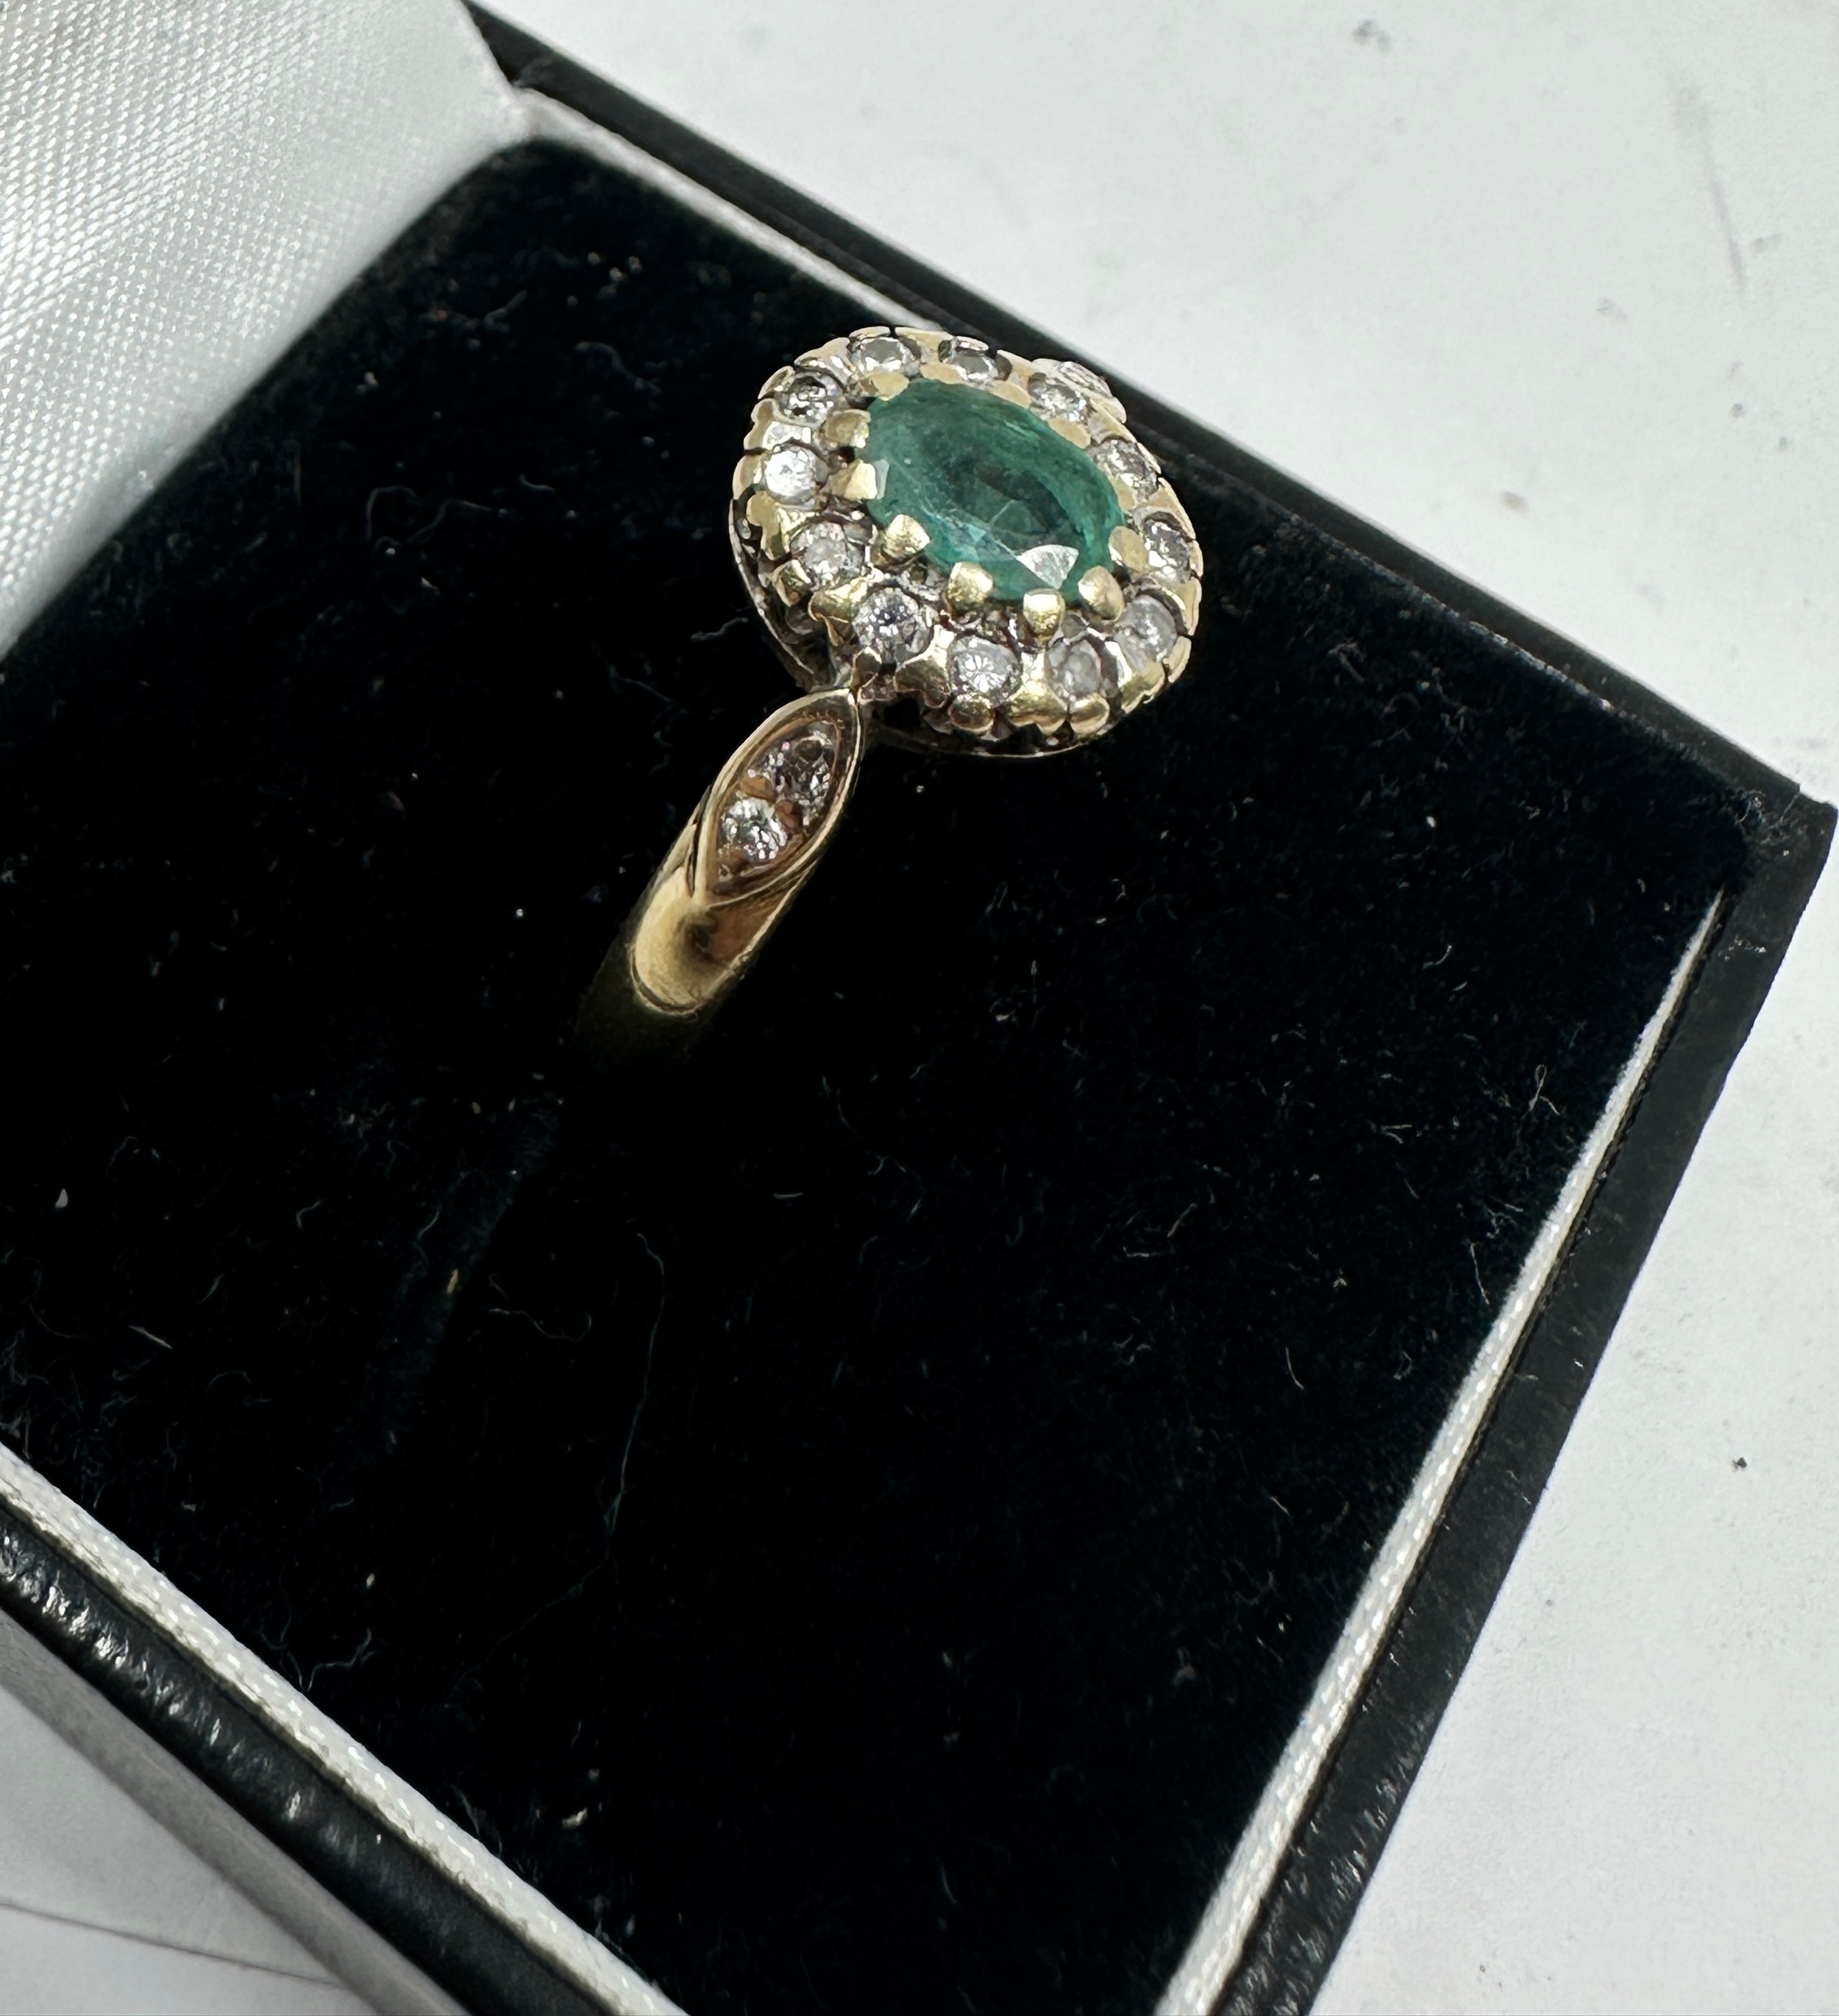 9ct gold emerald & diamond ring weight 3g - Image 2 of 4